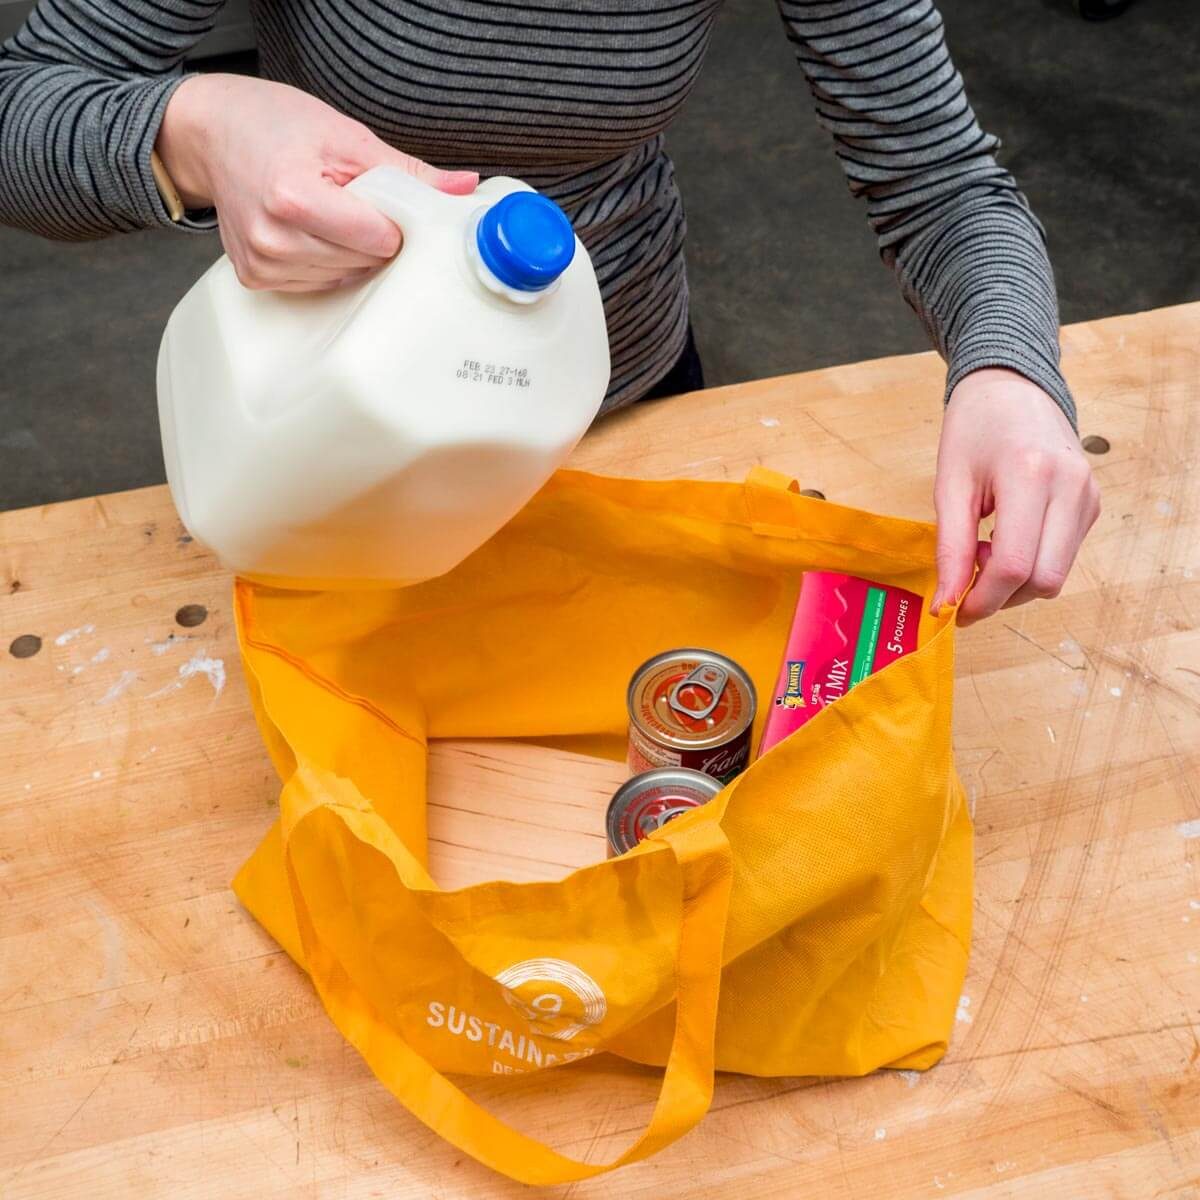 Make Your Reusable Grocery Bags Sturdier